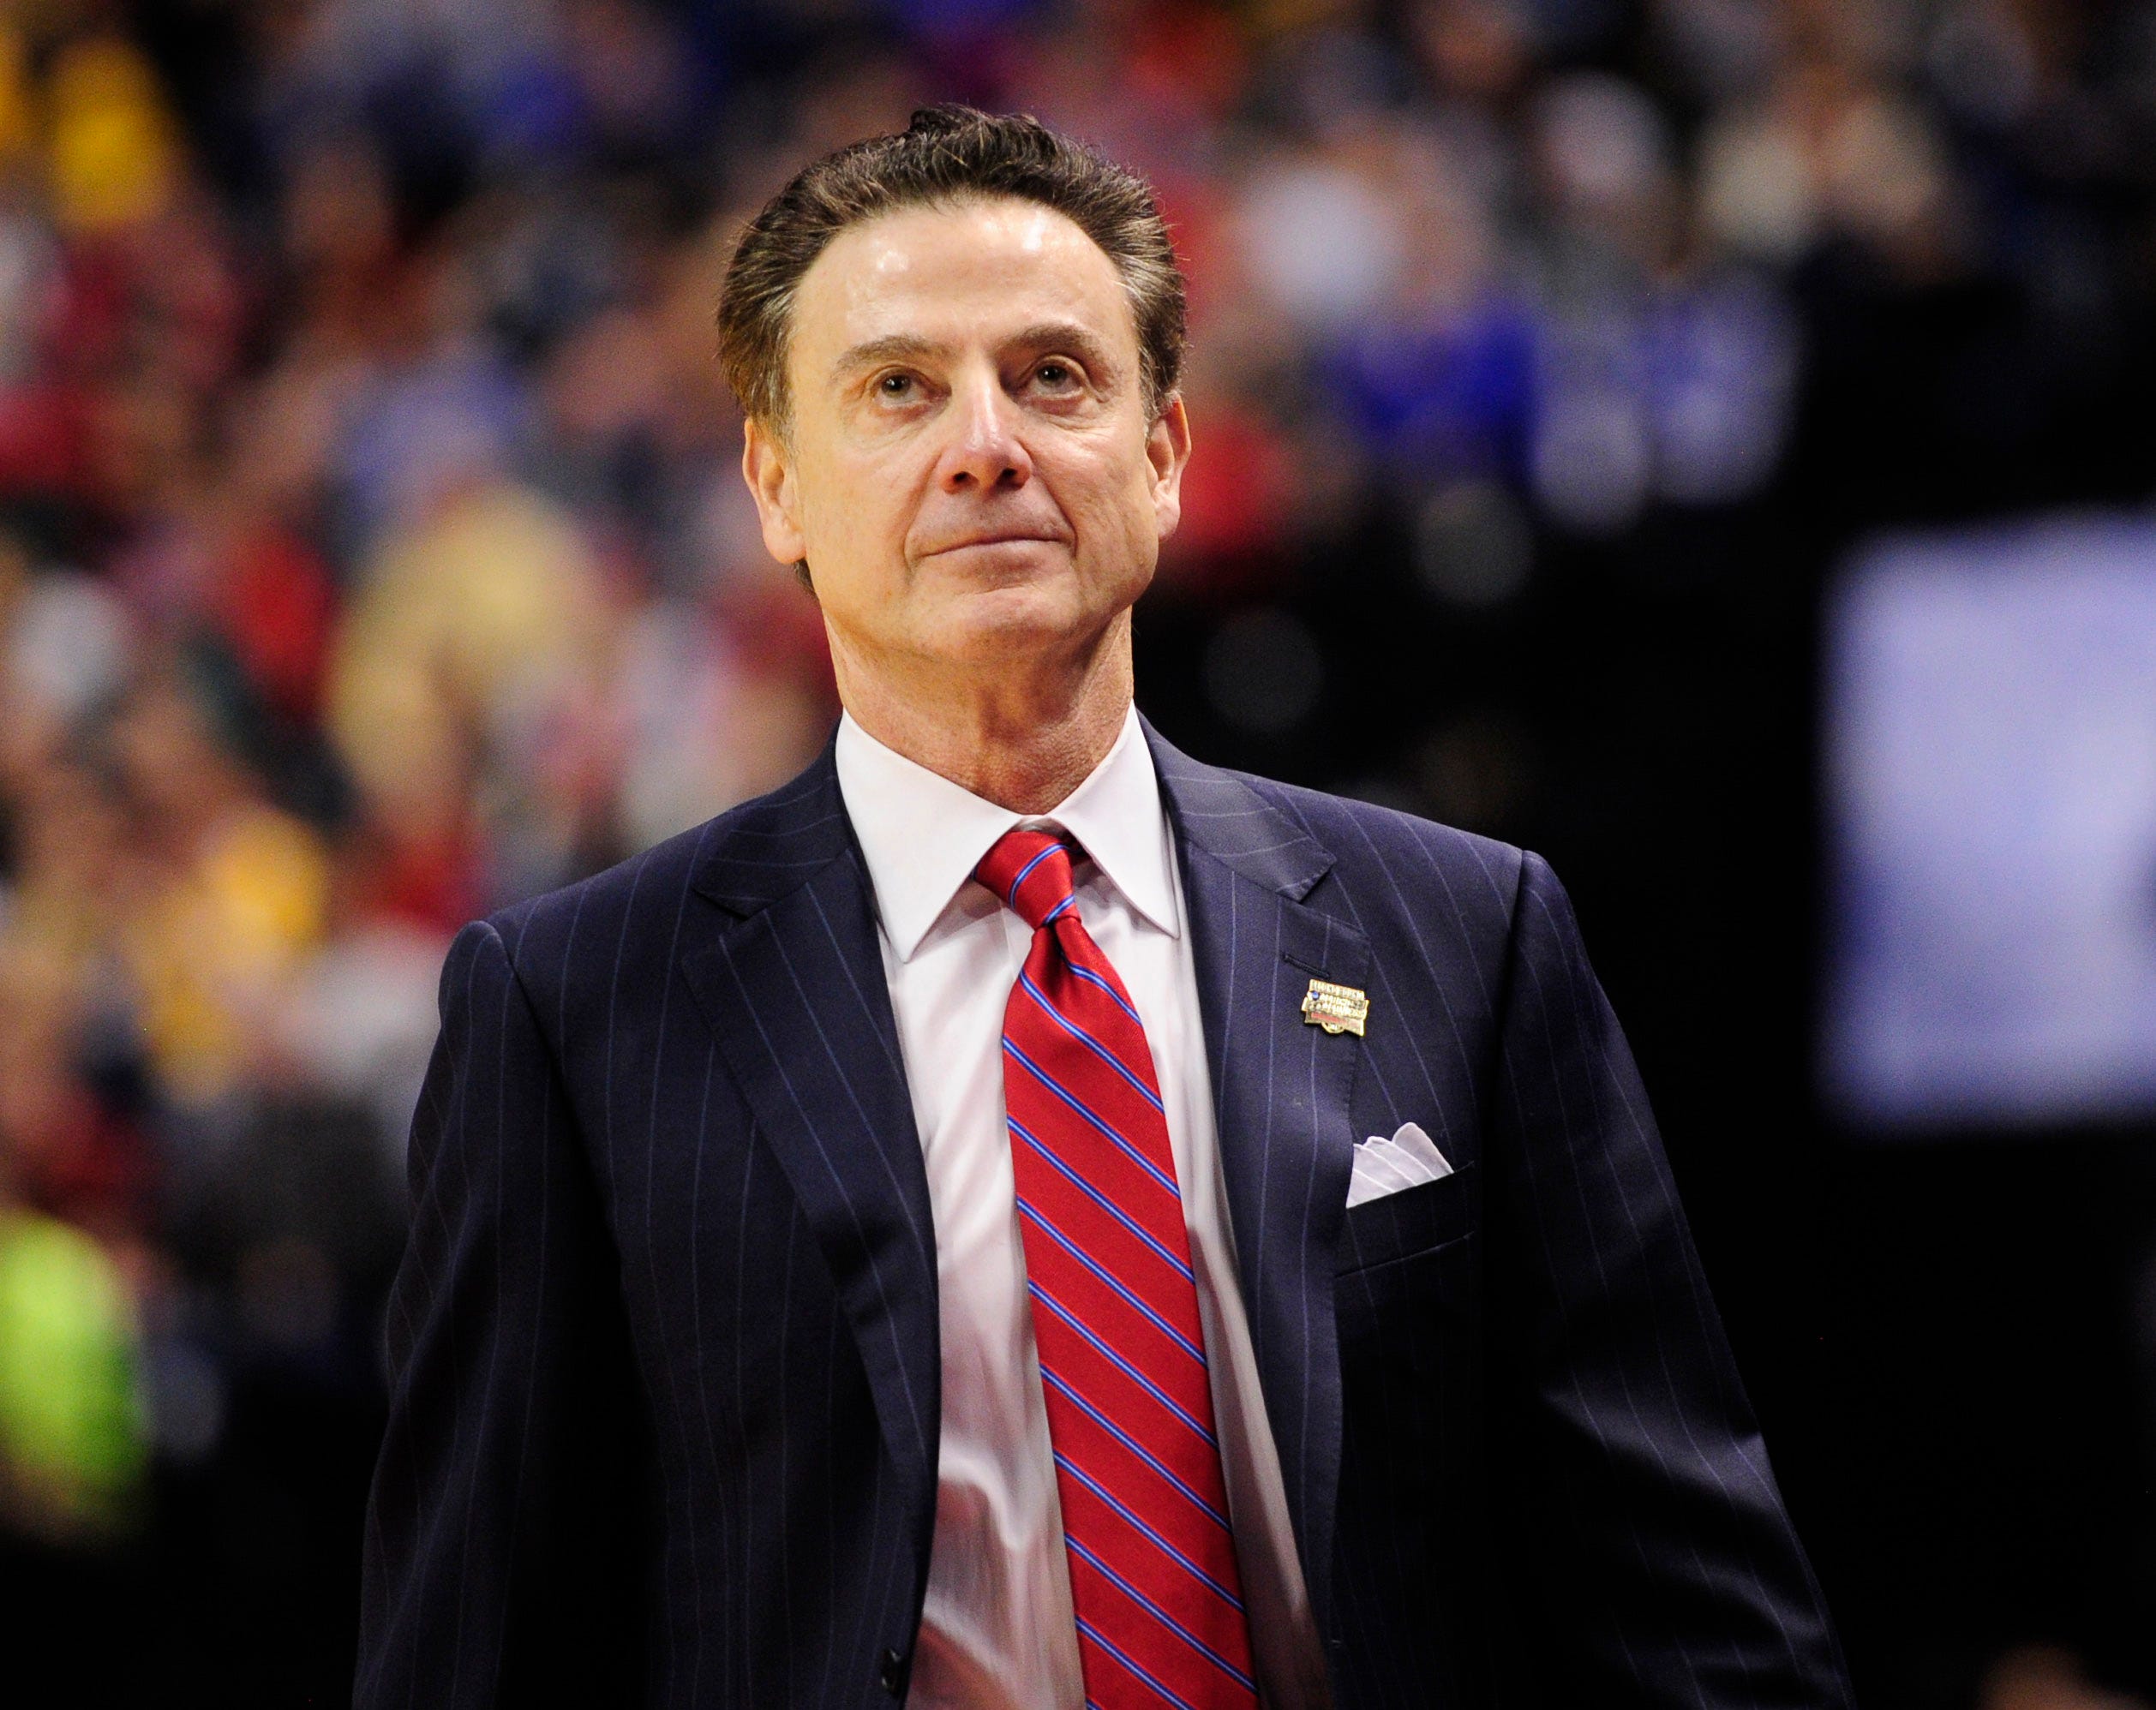 The 69-year old son of father Seb Sarkisian and mother Sally Sarkisian Rick Pitino in 2022 photo. Rick Pitino earned a 7.7 million dollar salary - leaving the net worth at  million in 2022